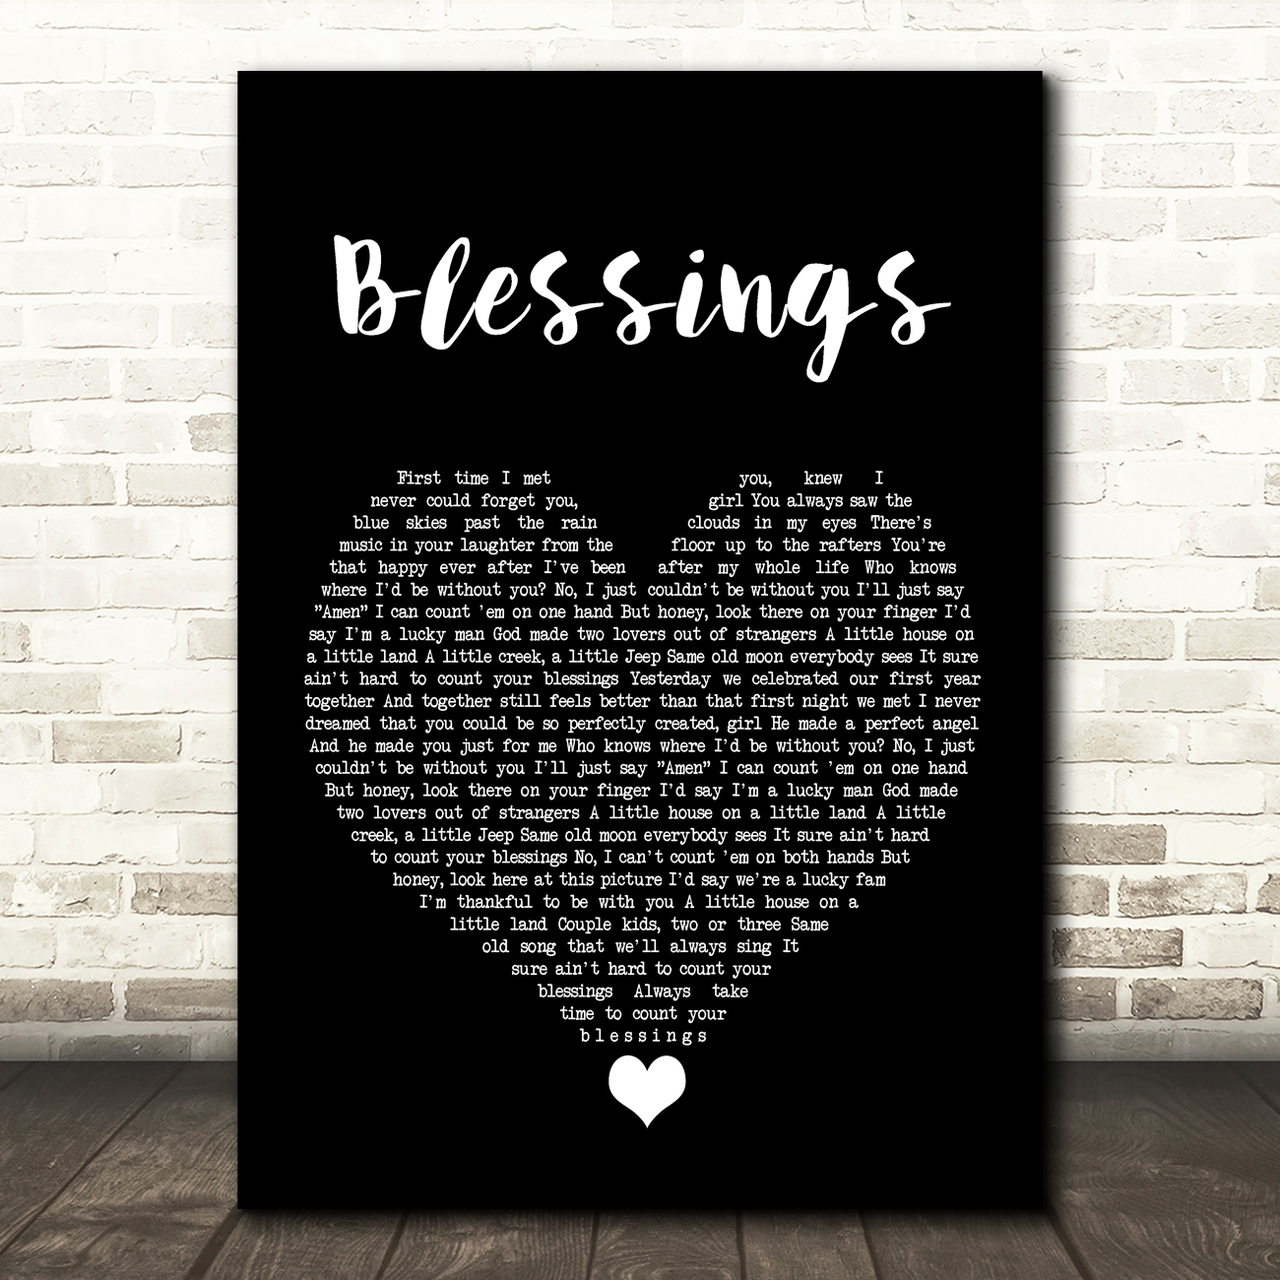 Florida Georgia Line Blessings Black Heart Song Lyric Quote Music Poster Print